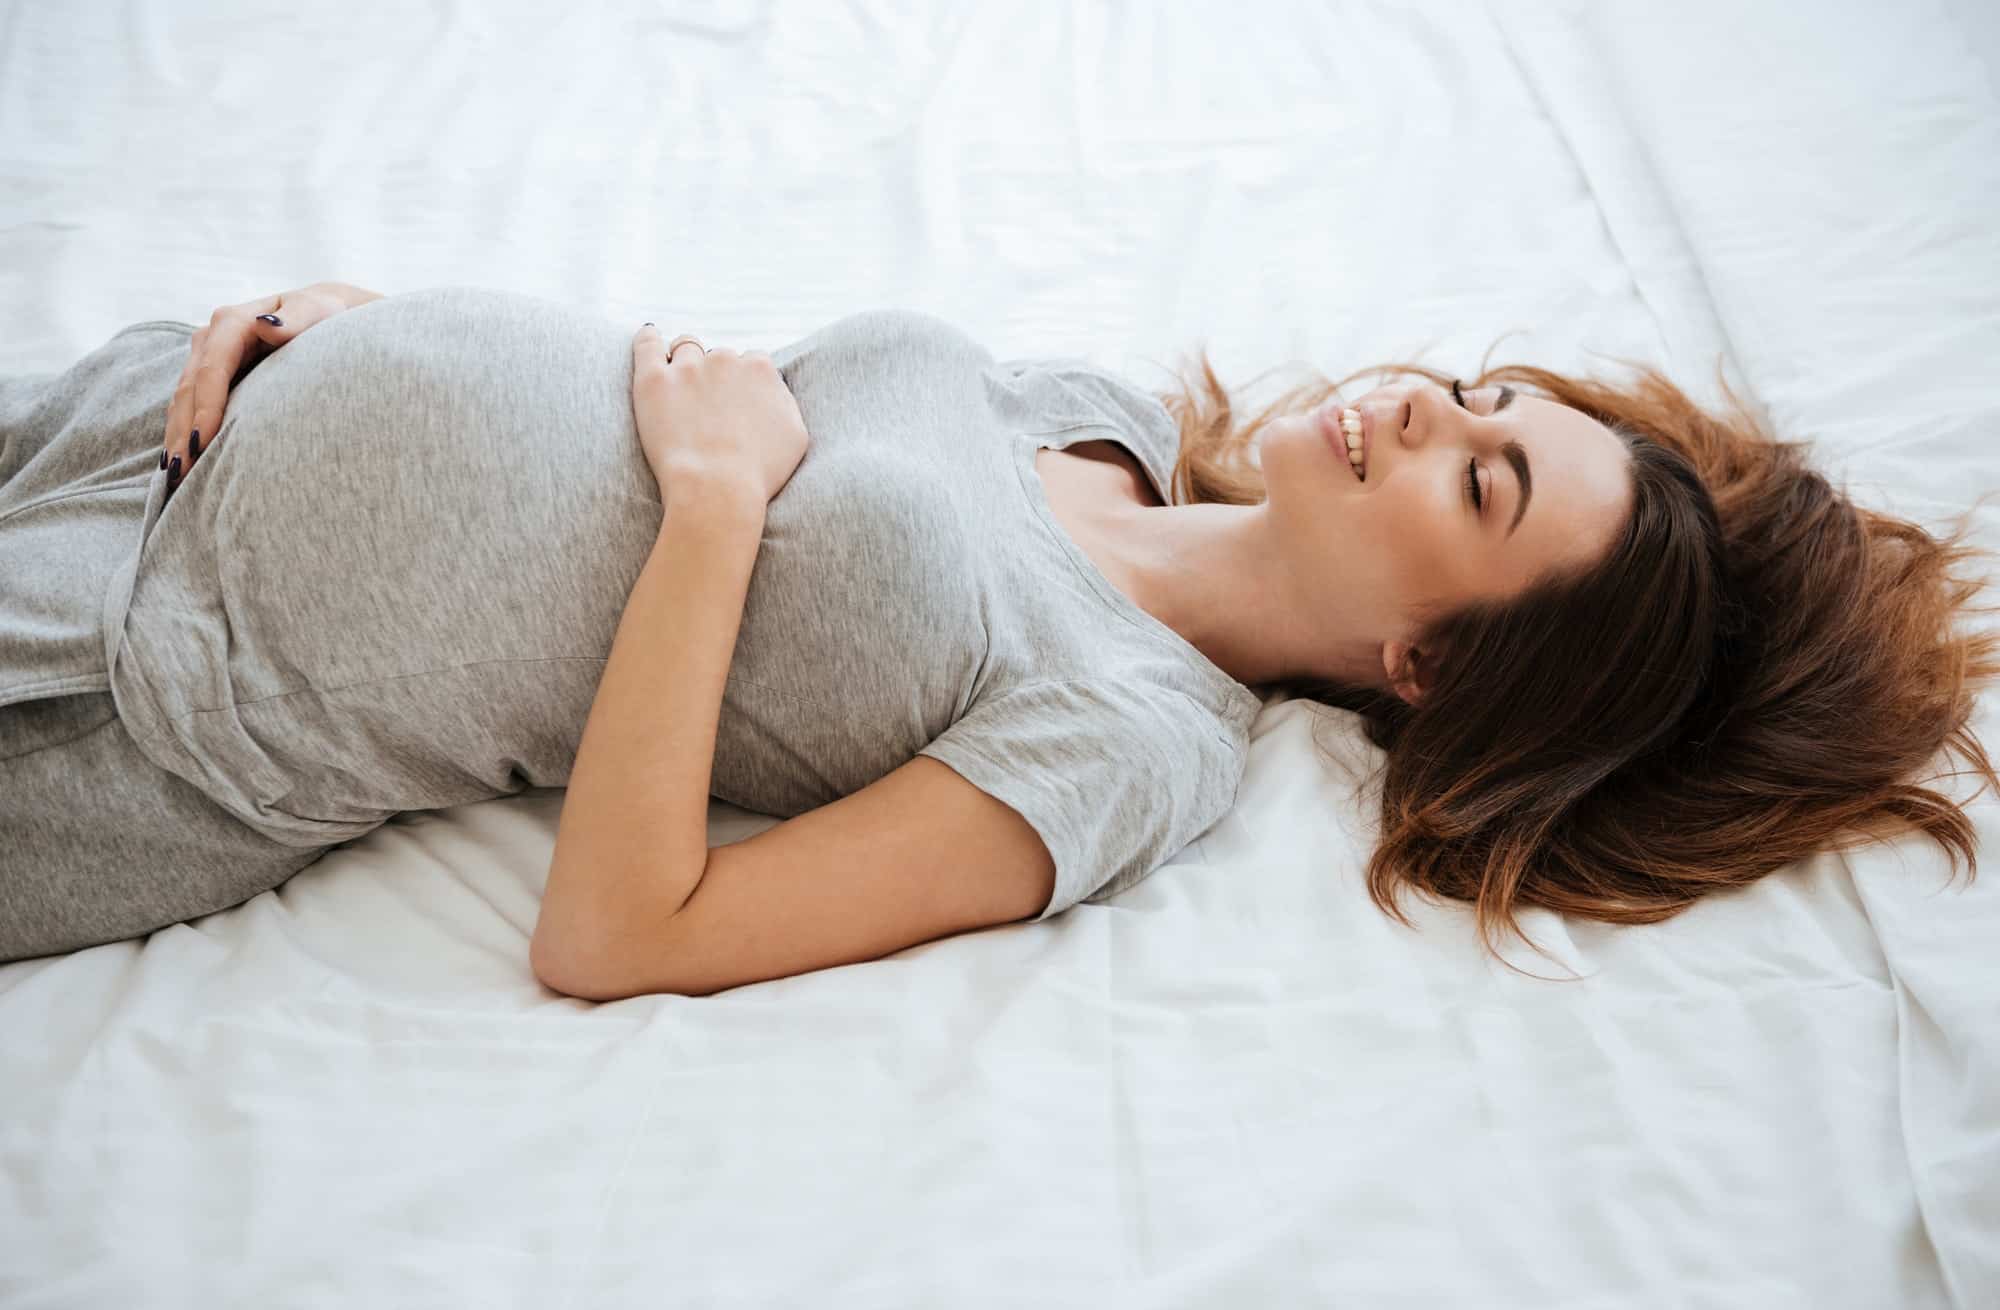 How Long Does It Take for a Woman’s Body to Go Back to Normal After Pregnancy?